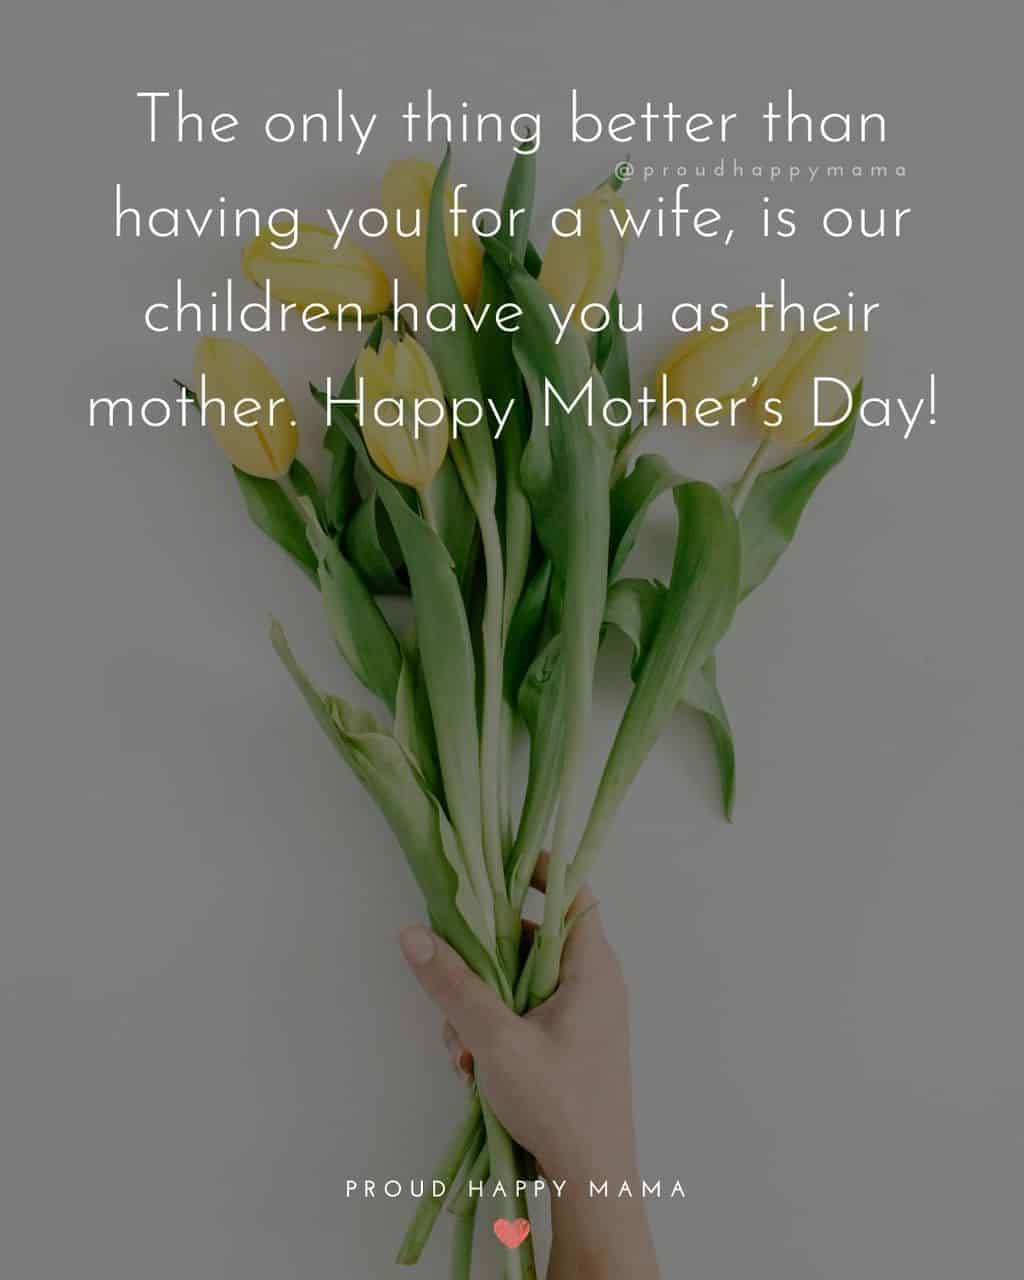 Happy Mothers Day Quotes For Wife - The only thing better than having you for a wife, is our children have you as their mother.